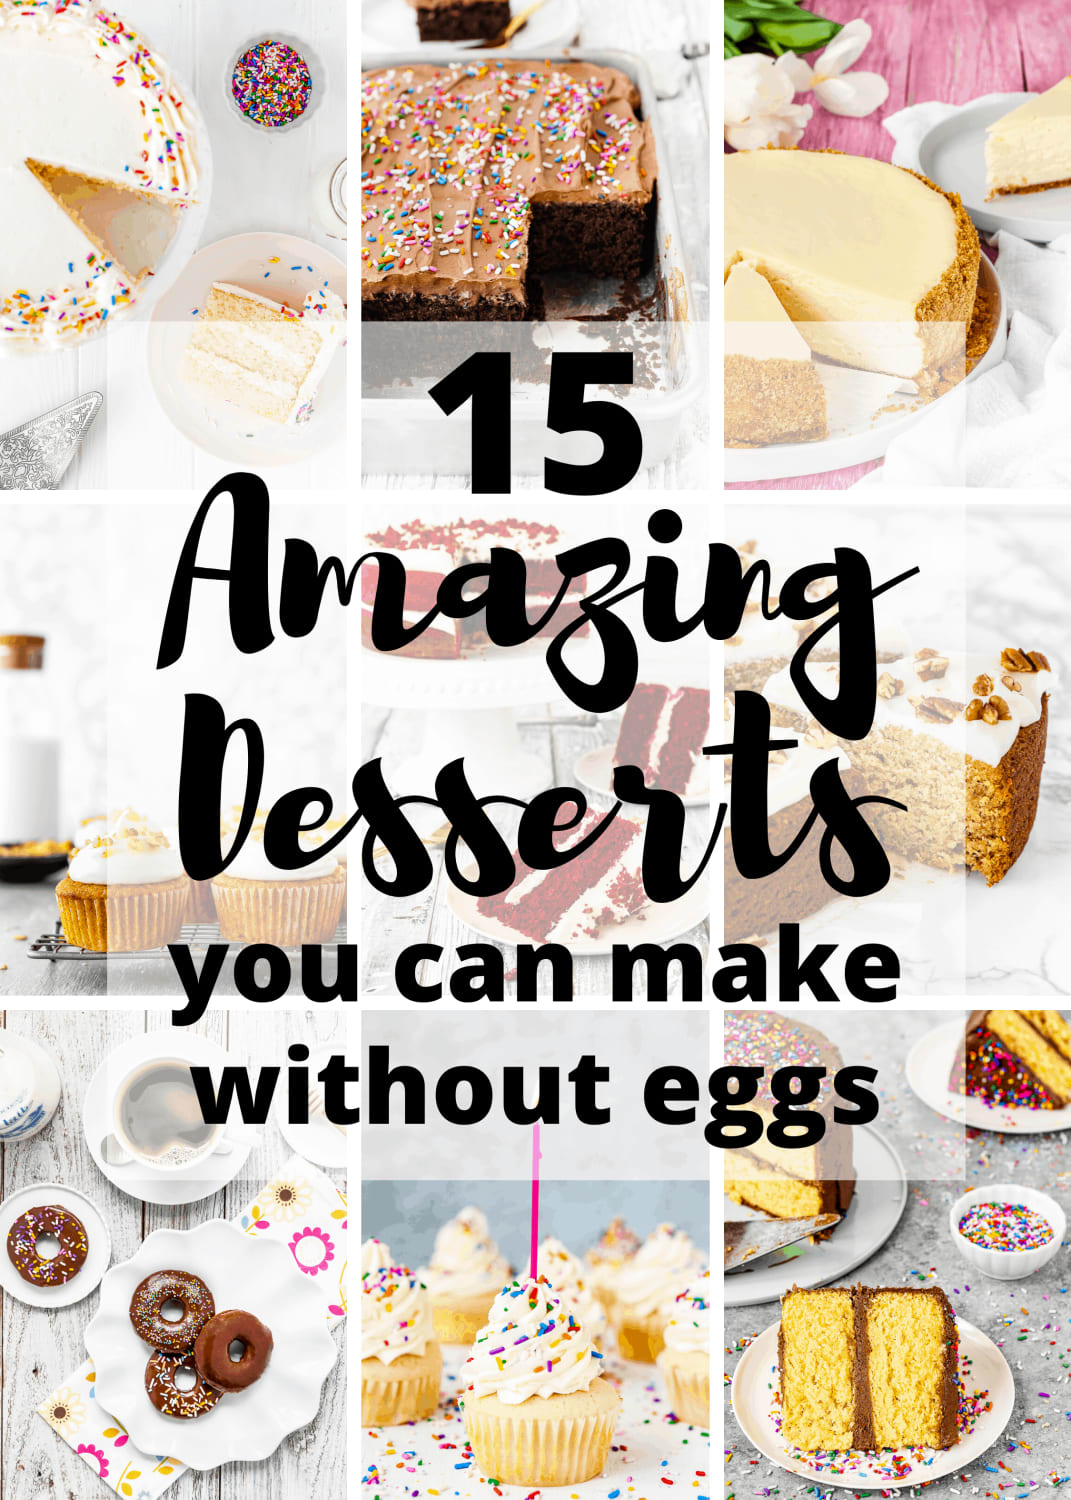 15 Amazing Desserts You Can Make Without Eggs